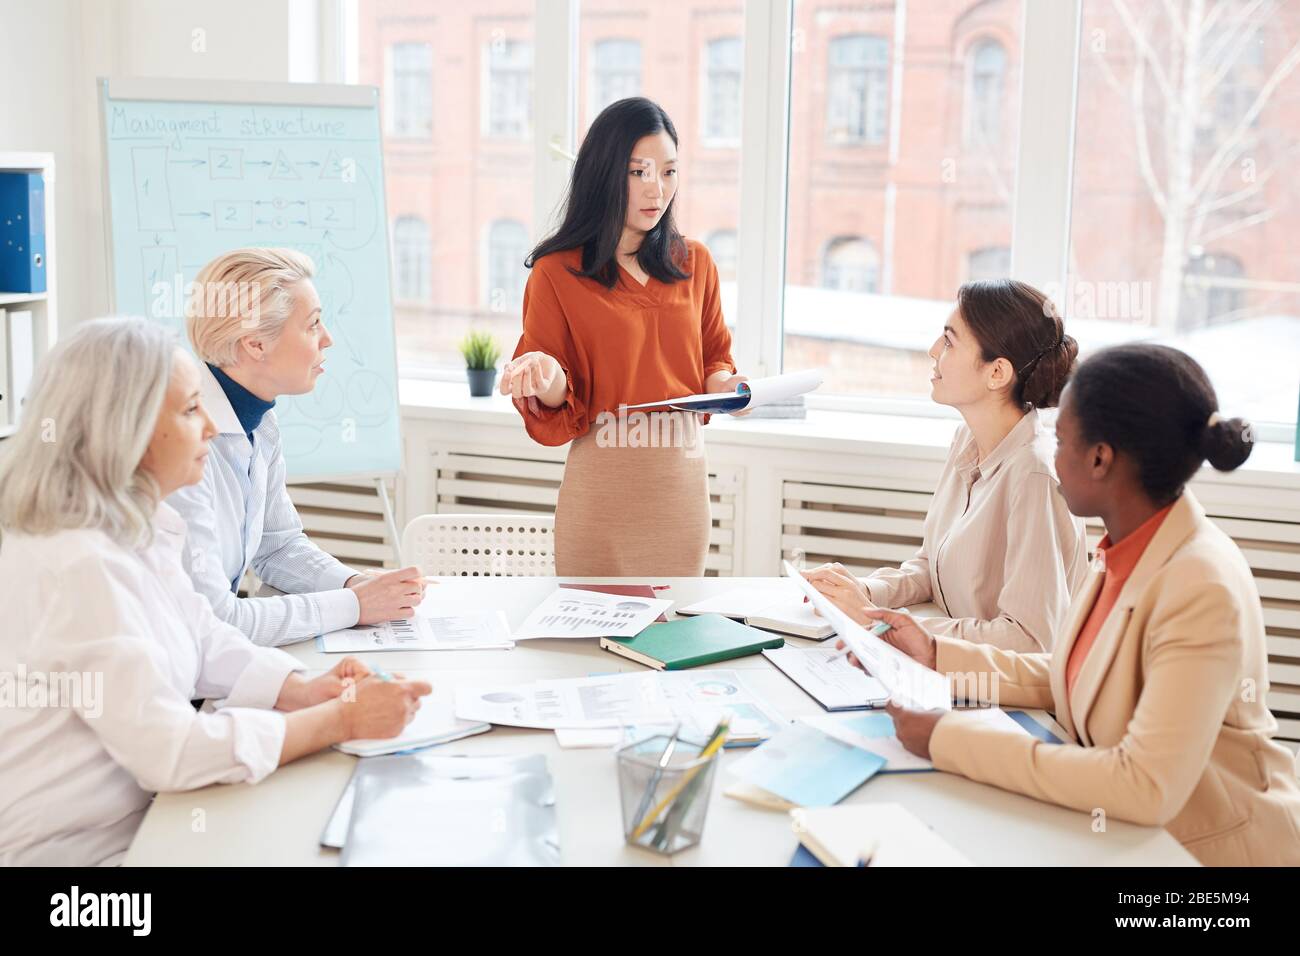 Portrait of successful Asian businesswoman presenting project plan to group of female colleagues while standing by whiteboard during meeting in confer Stock Photo